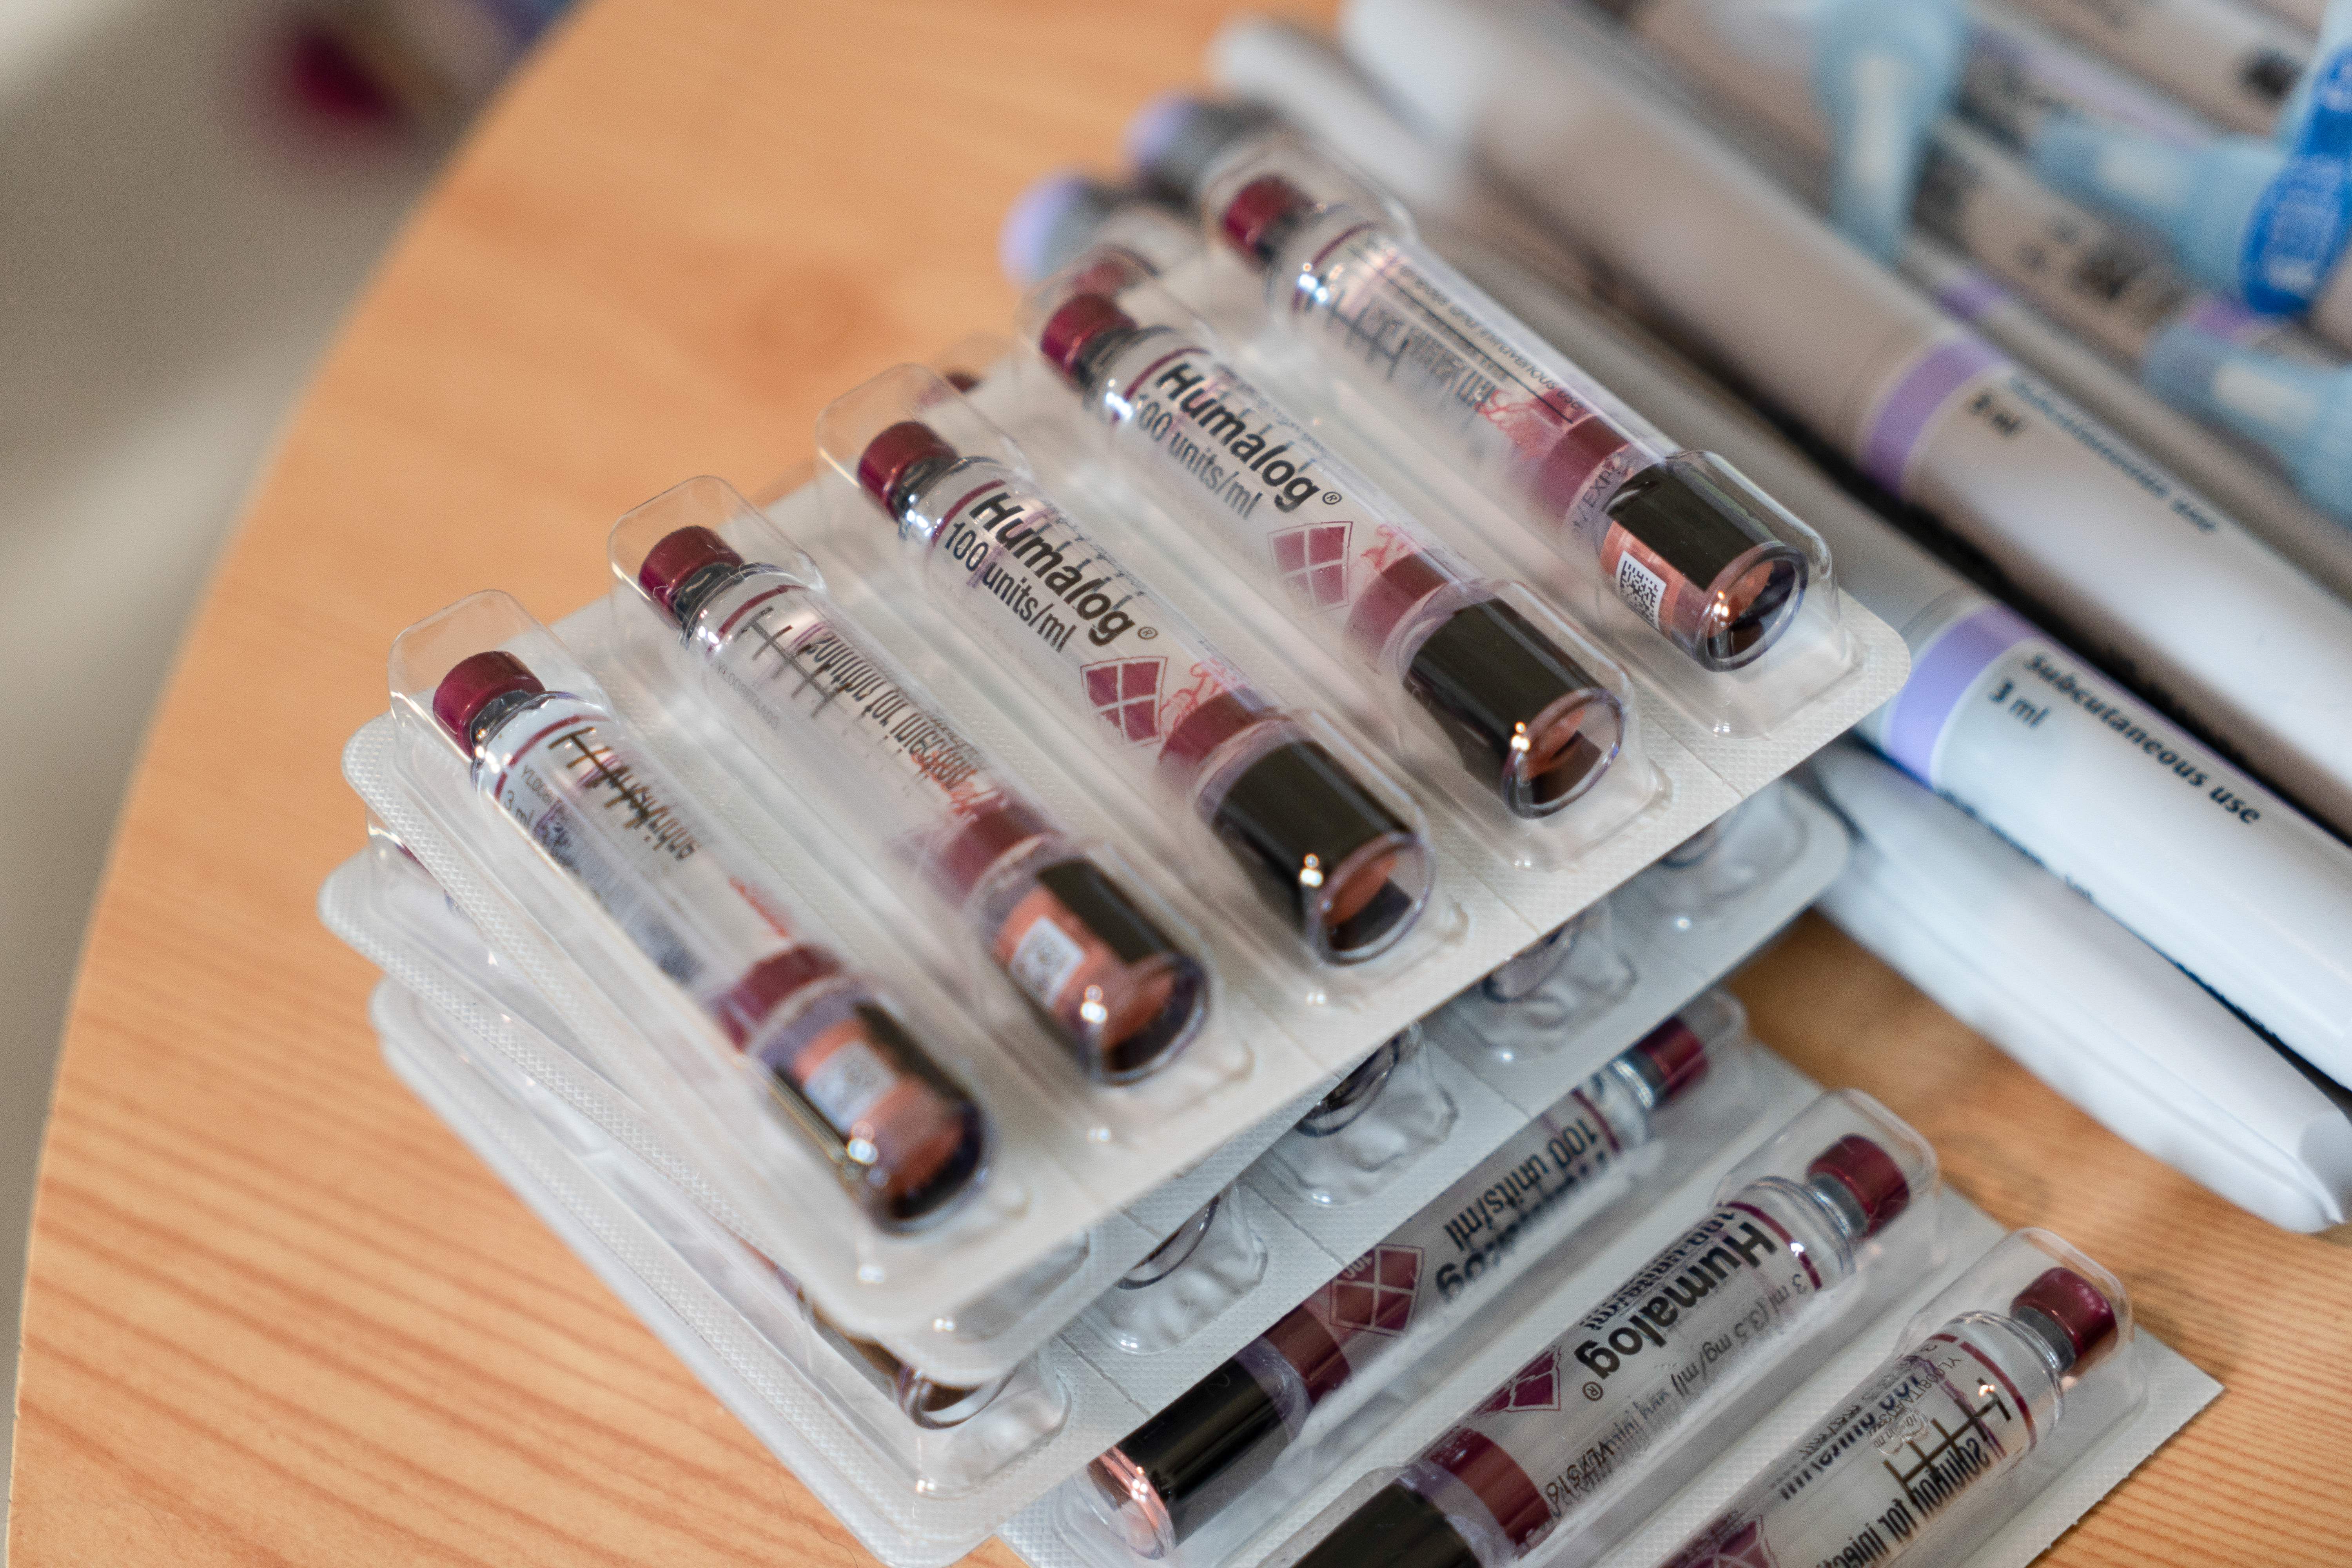 Vials of insulin belonging to David Burns, 38, who has type 1 diabetes, are photographed in his home in North London on February 24, 2019. (NIKLAS HALLE'N/AFP/Getty Images)